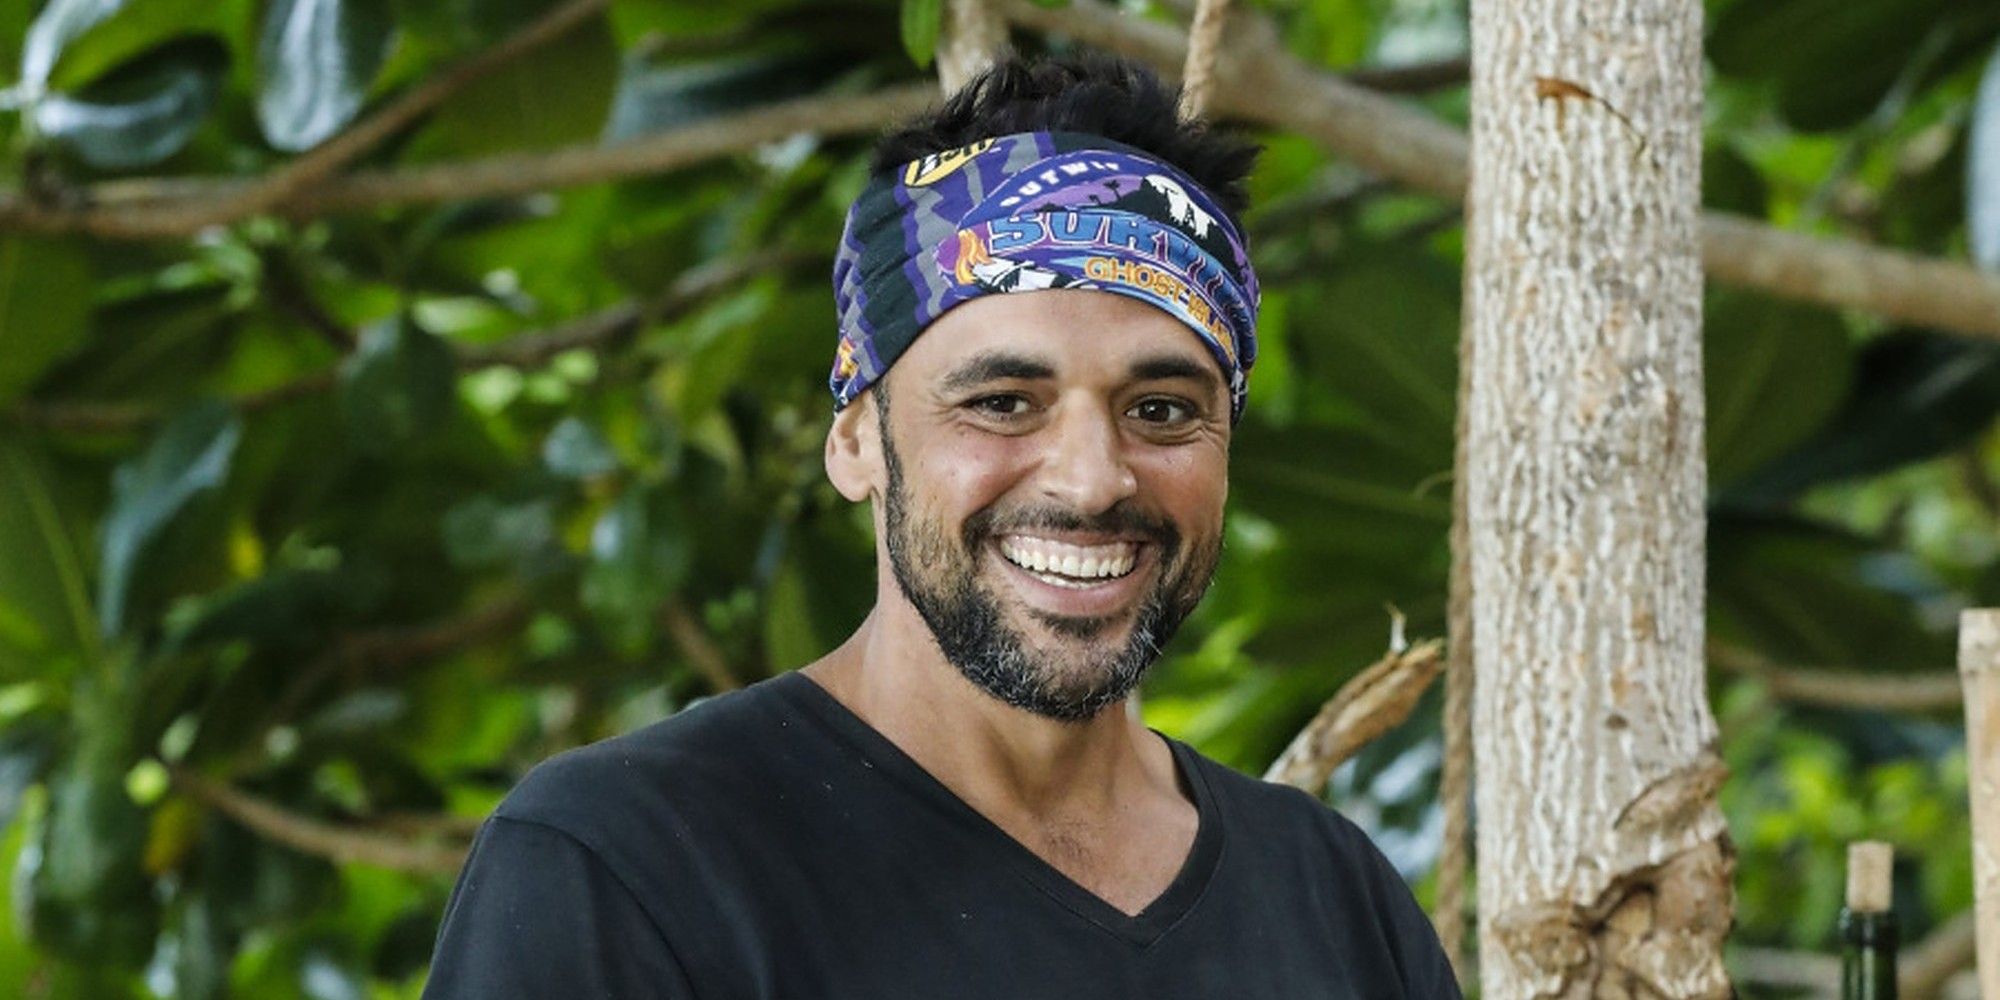 The Challenge USA: Everything To Know About Survivor’s Domenick Abbate